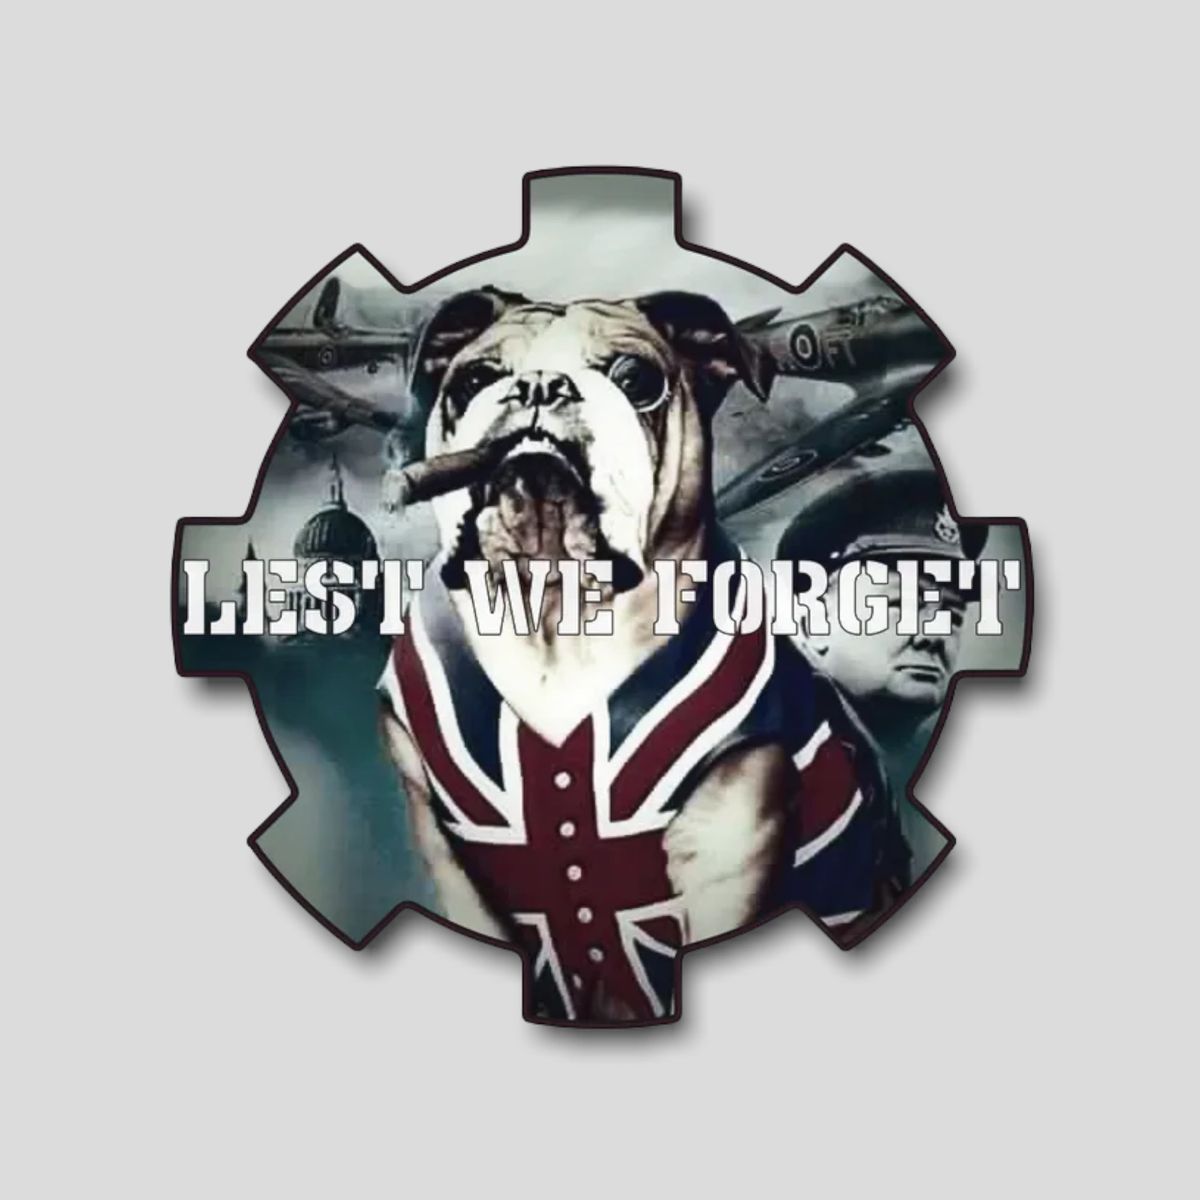 Lest We Forget Bulldog self adhesive vinyl decal sticker in various sizes